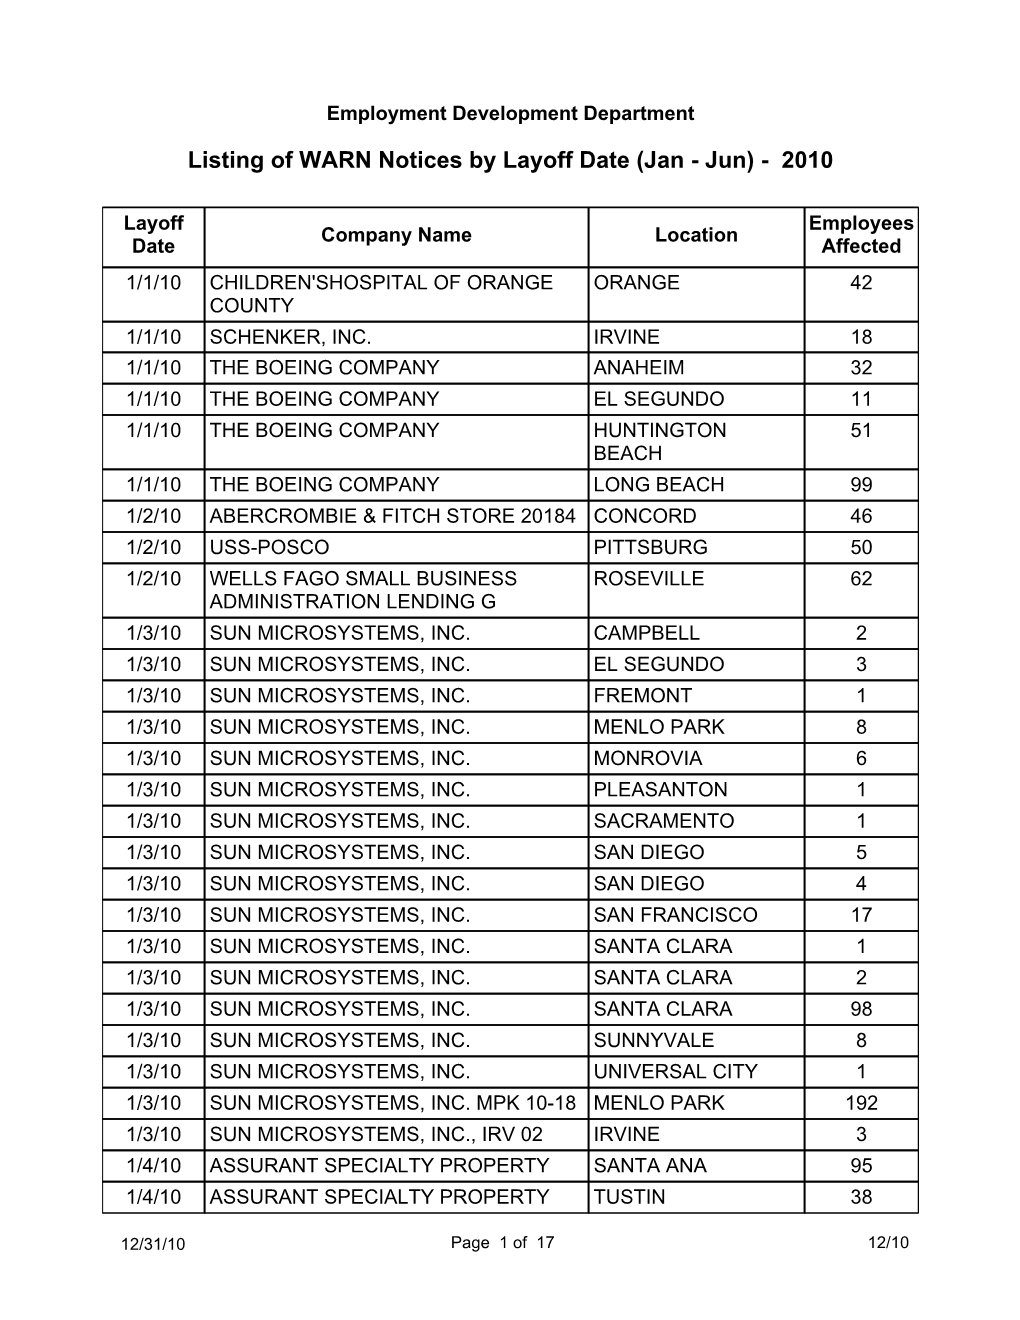 Listing of WARN Notices by Layoff Date (Jan - Jun) - 2010